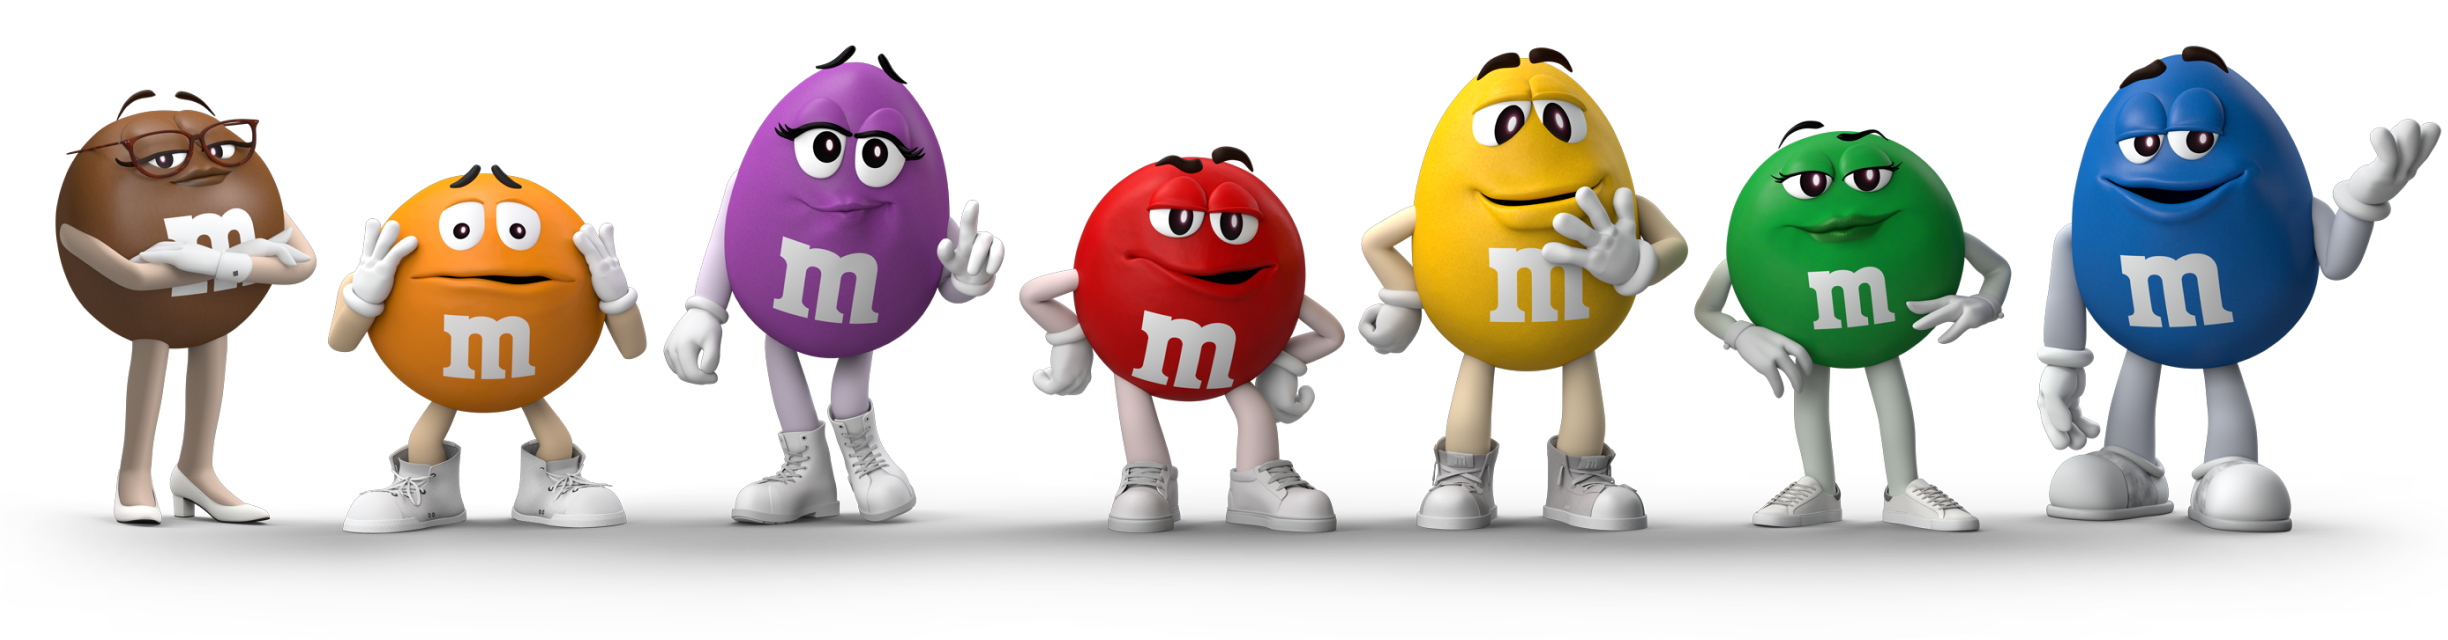 Personalized M&M'S from Mymms.com